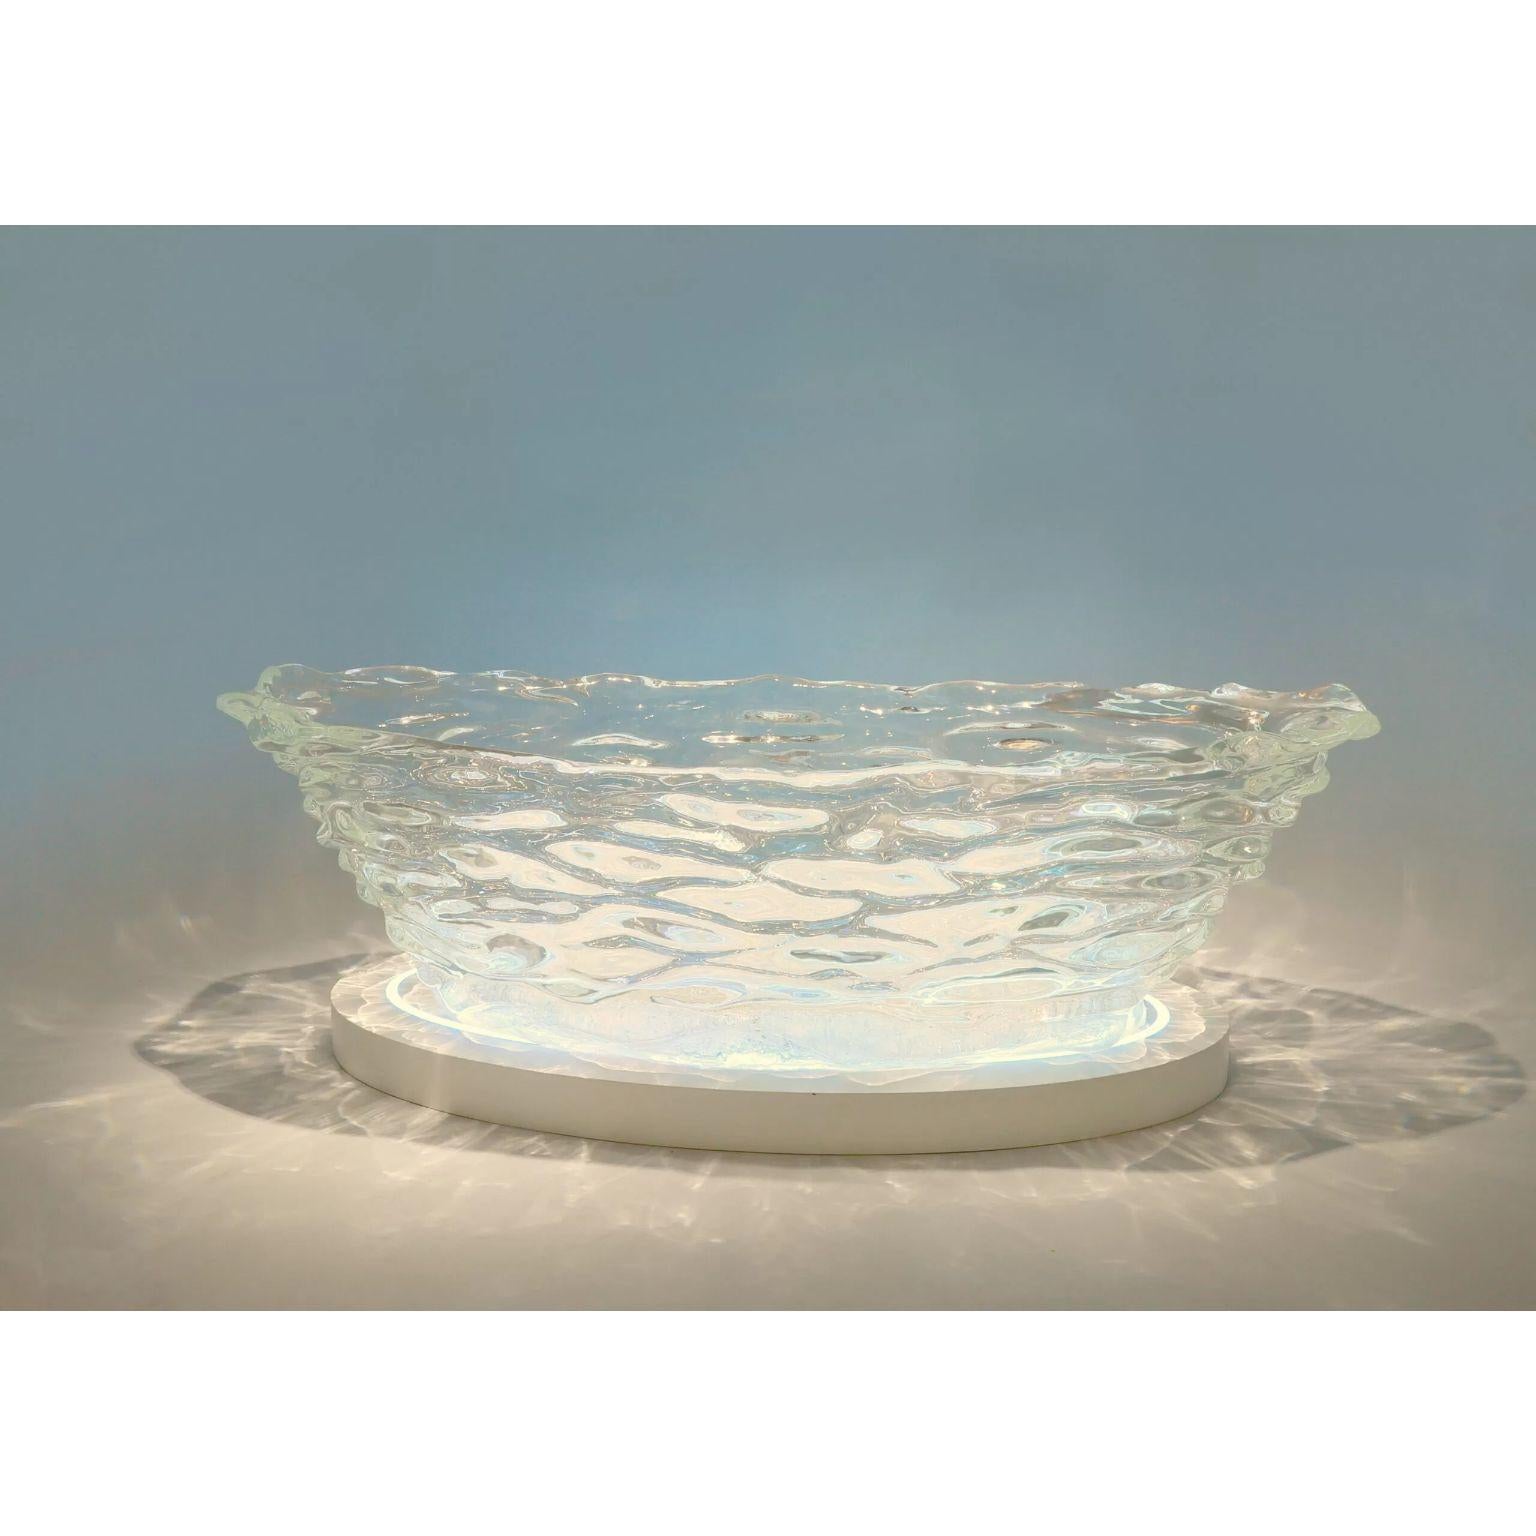 Branched Crystal Bathtub by Dainte
Dimensions: D 86.5 x W 198 x H 62.5 cm.
Materials: Mixed crystal.

Reconnect with the unbridled beauty and power of nature as the Branched Iconic Master Bathtub reminds your senses of the pure streams ebbing and